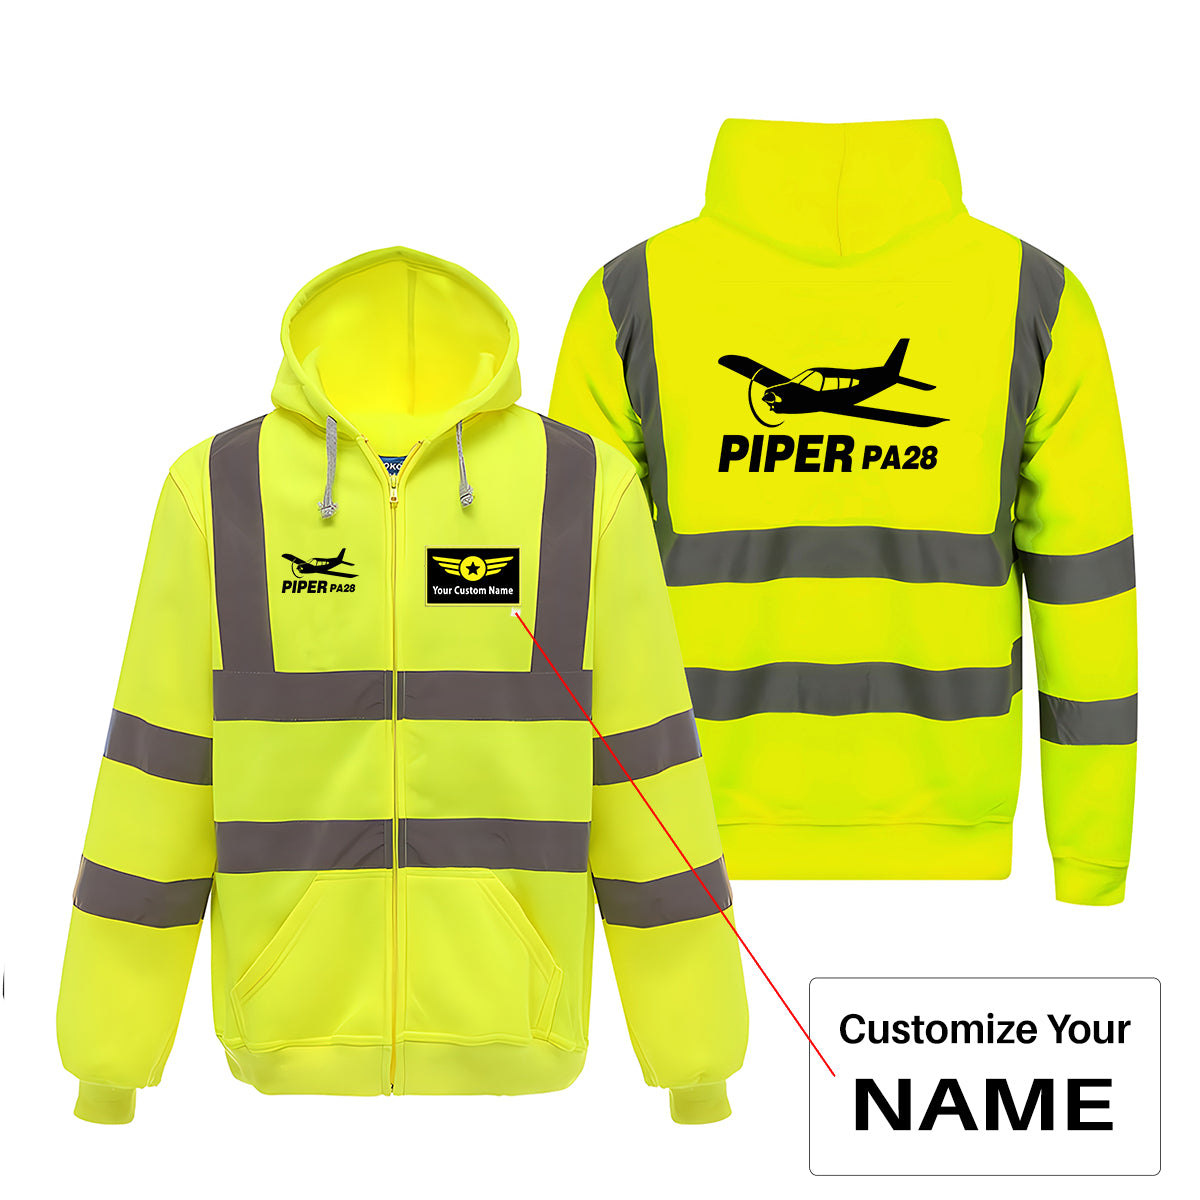 The Piper PA28 Designed Reflective Zipped Hoodies